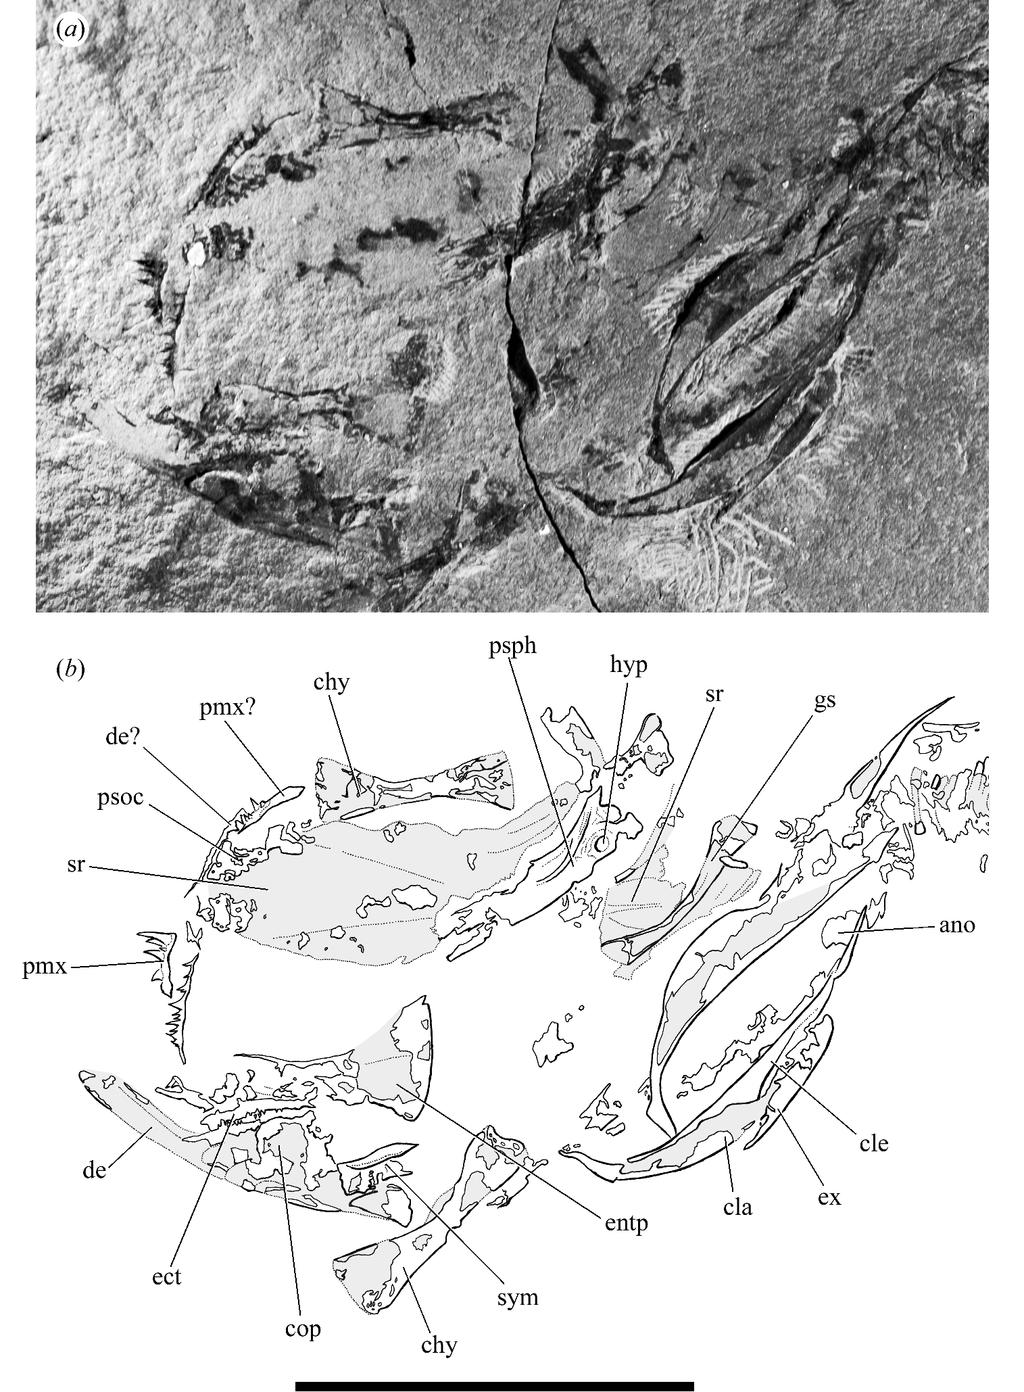 Electronic Appendix A. Supplemental Morphological Data. Figure A1. Holopterygius nudus Jessen (P 7789a), latest Givetian-earliest Frasnian, Bergisch-Gladbach, Germany. Skull and pectoral girdle.